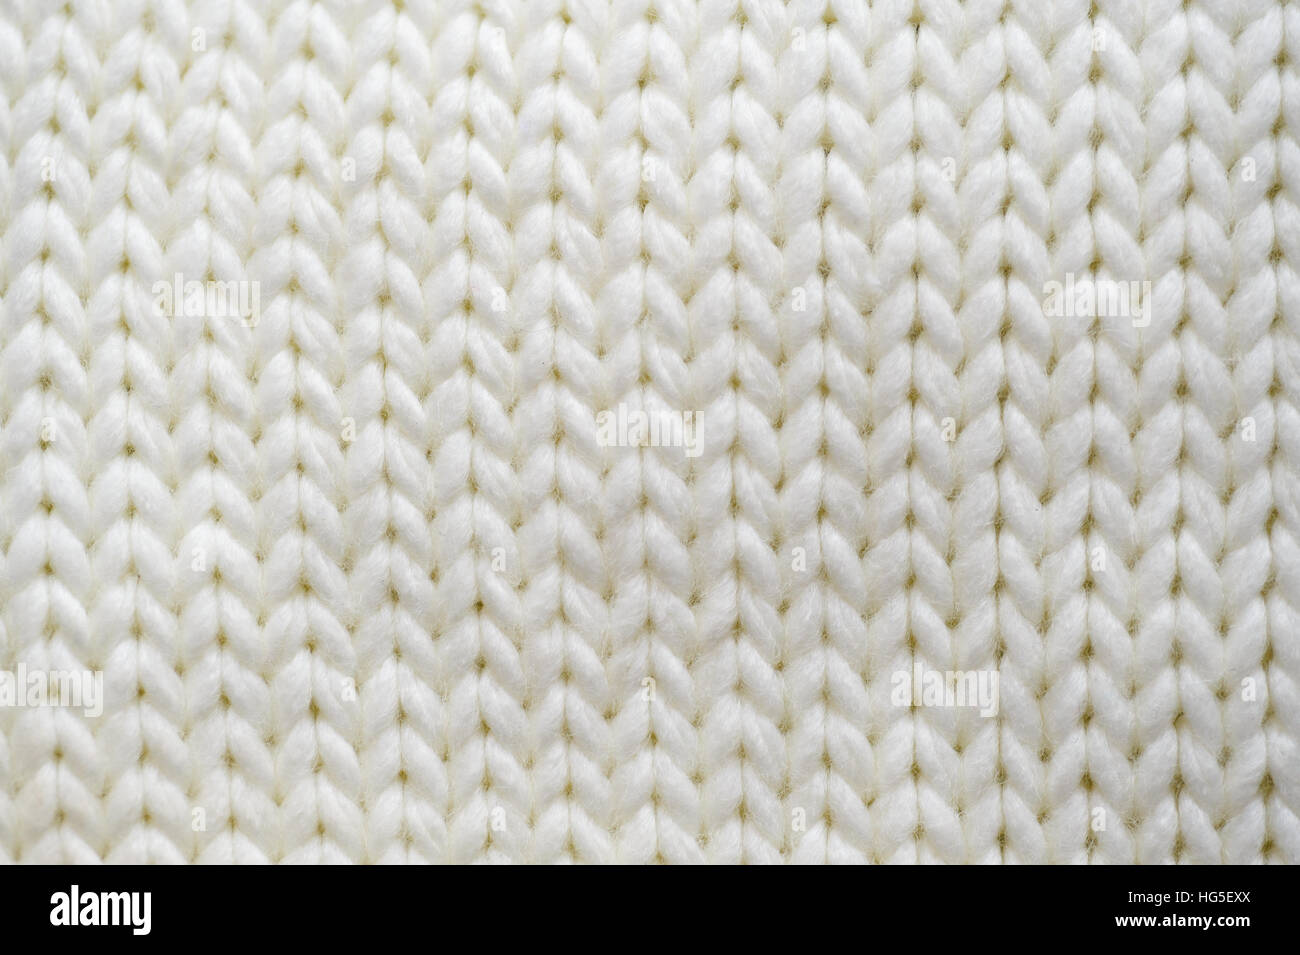 texture white knitted scarf Stock Photo